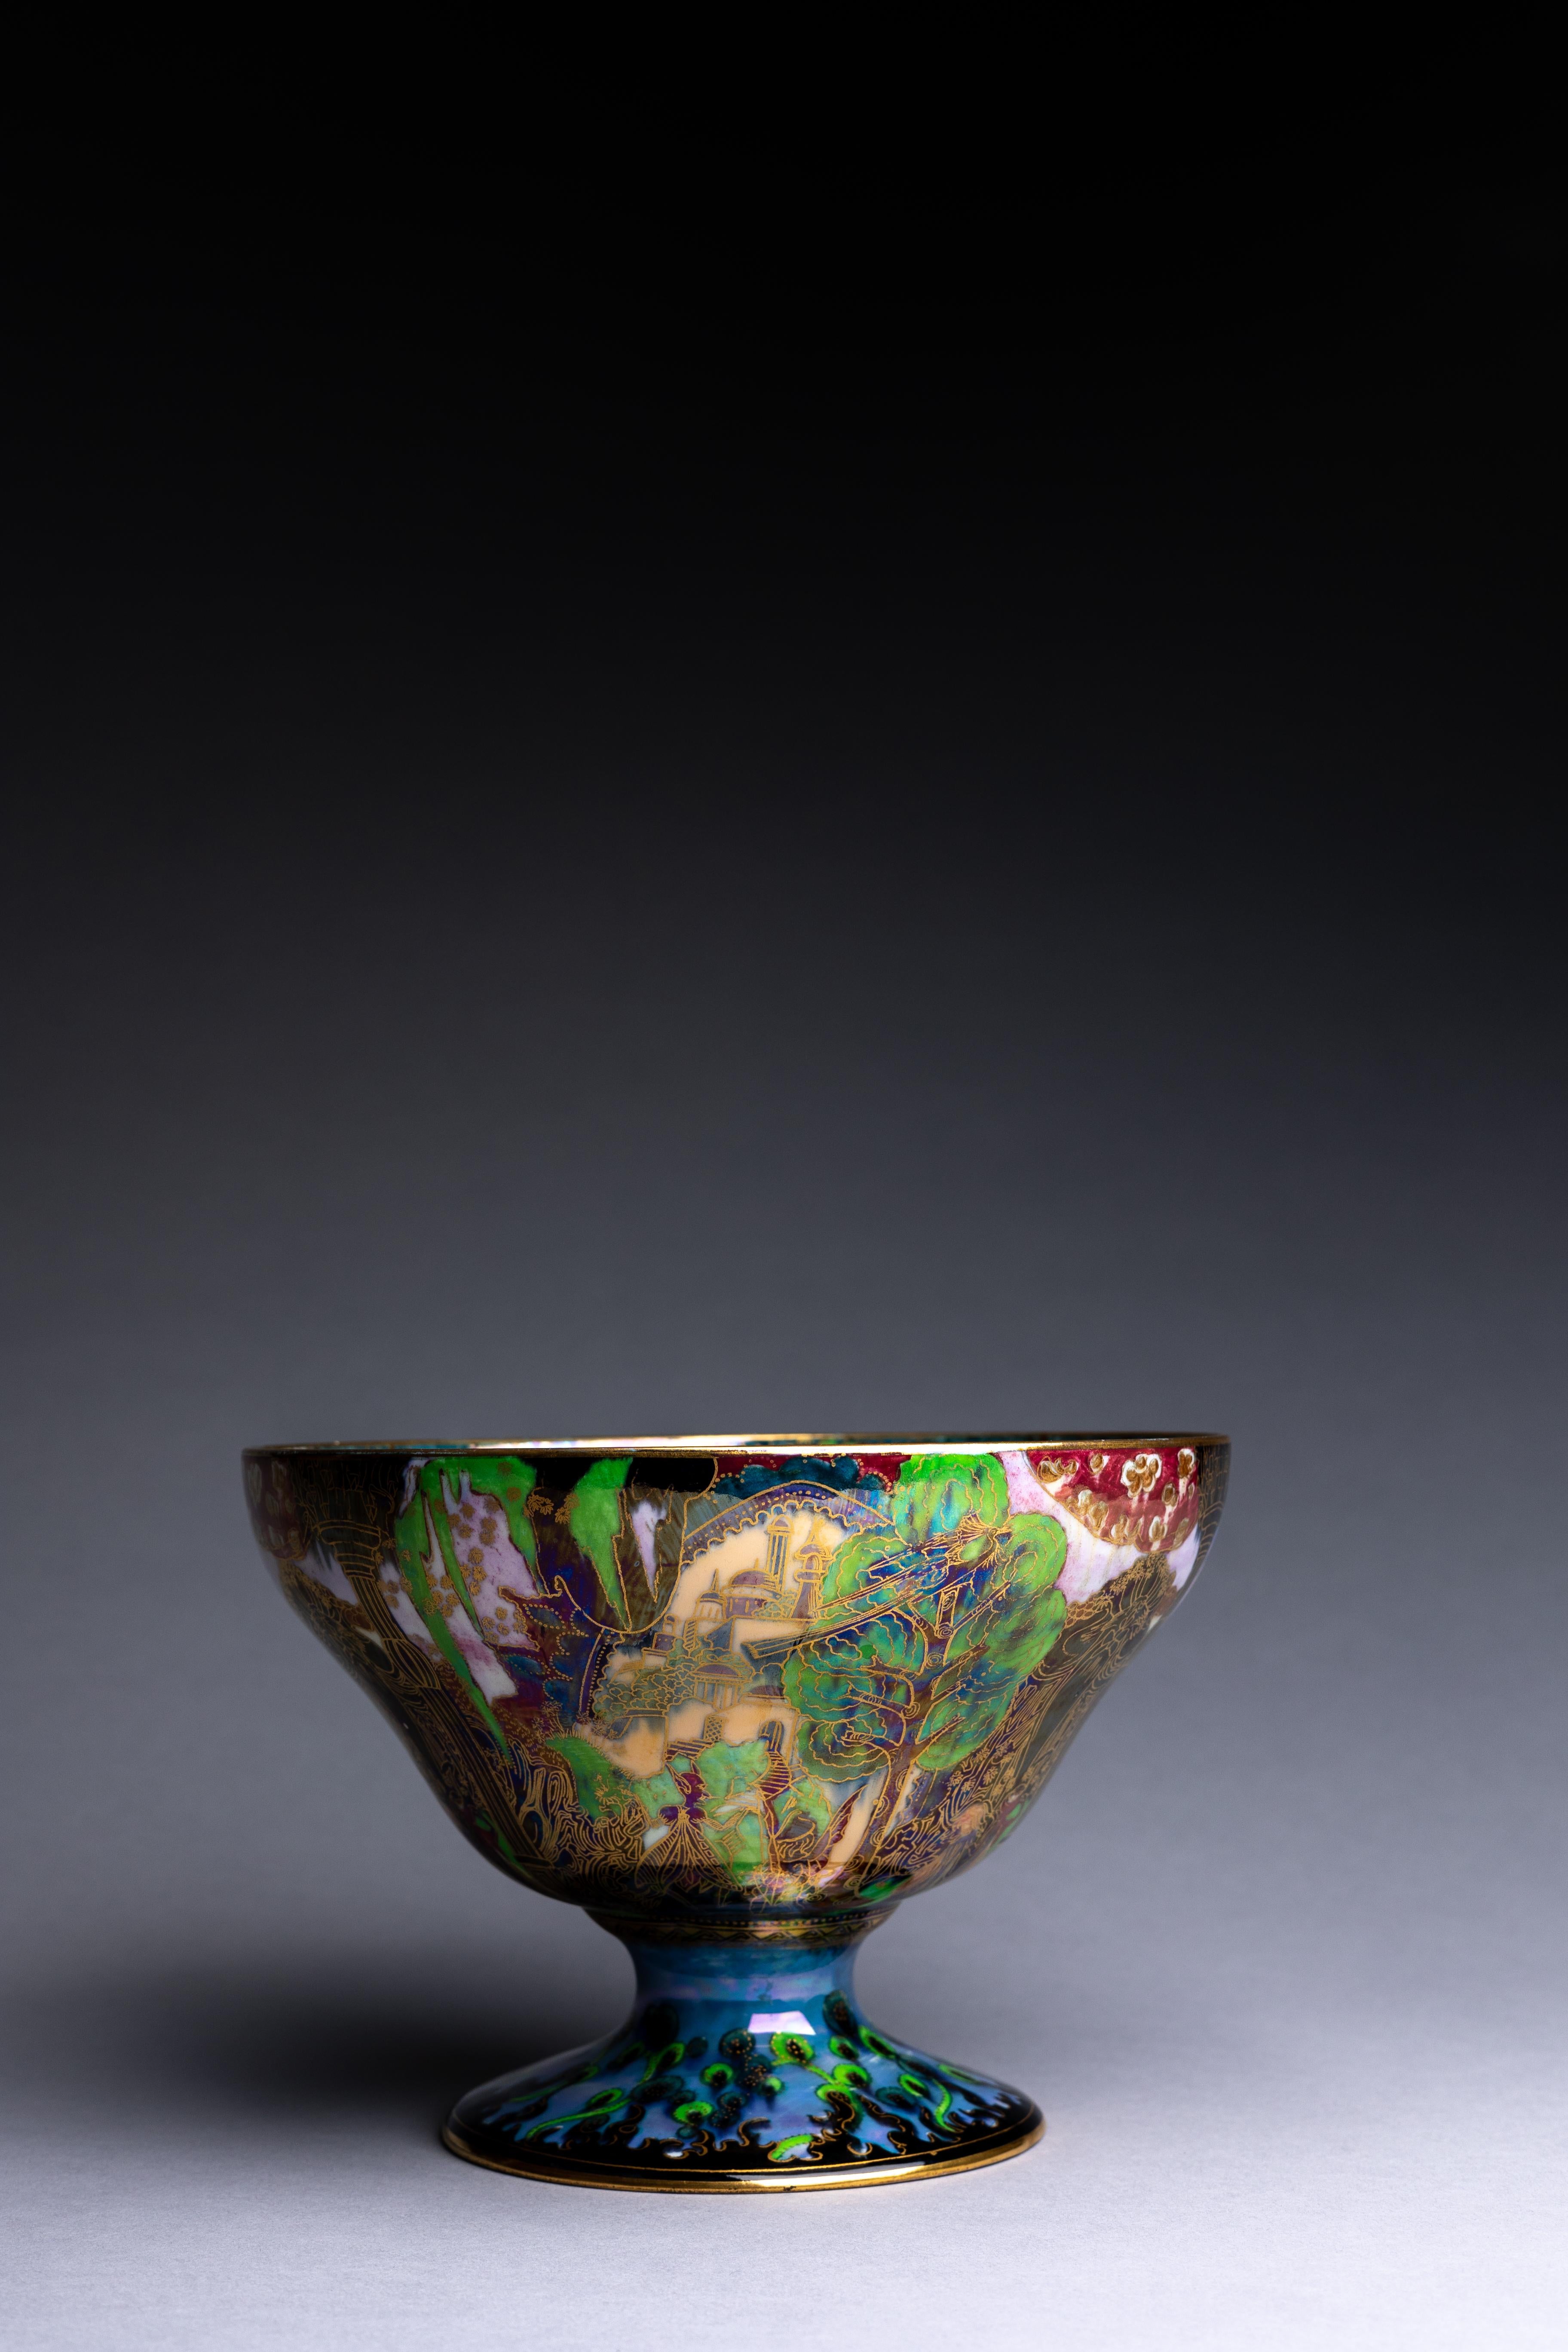 A Wedgwood Fairyland lustre bowl designed by Daisy Makeig-Jones ca. 1920 and decorated with the 'Garden of Paradise' pattern on the exterior and the 'Jumping Faun' pattern on the interior.

Daisy Makeig-Jones is best known for the Fairyland Lustre